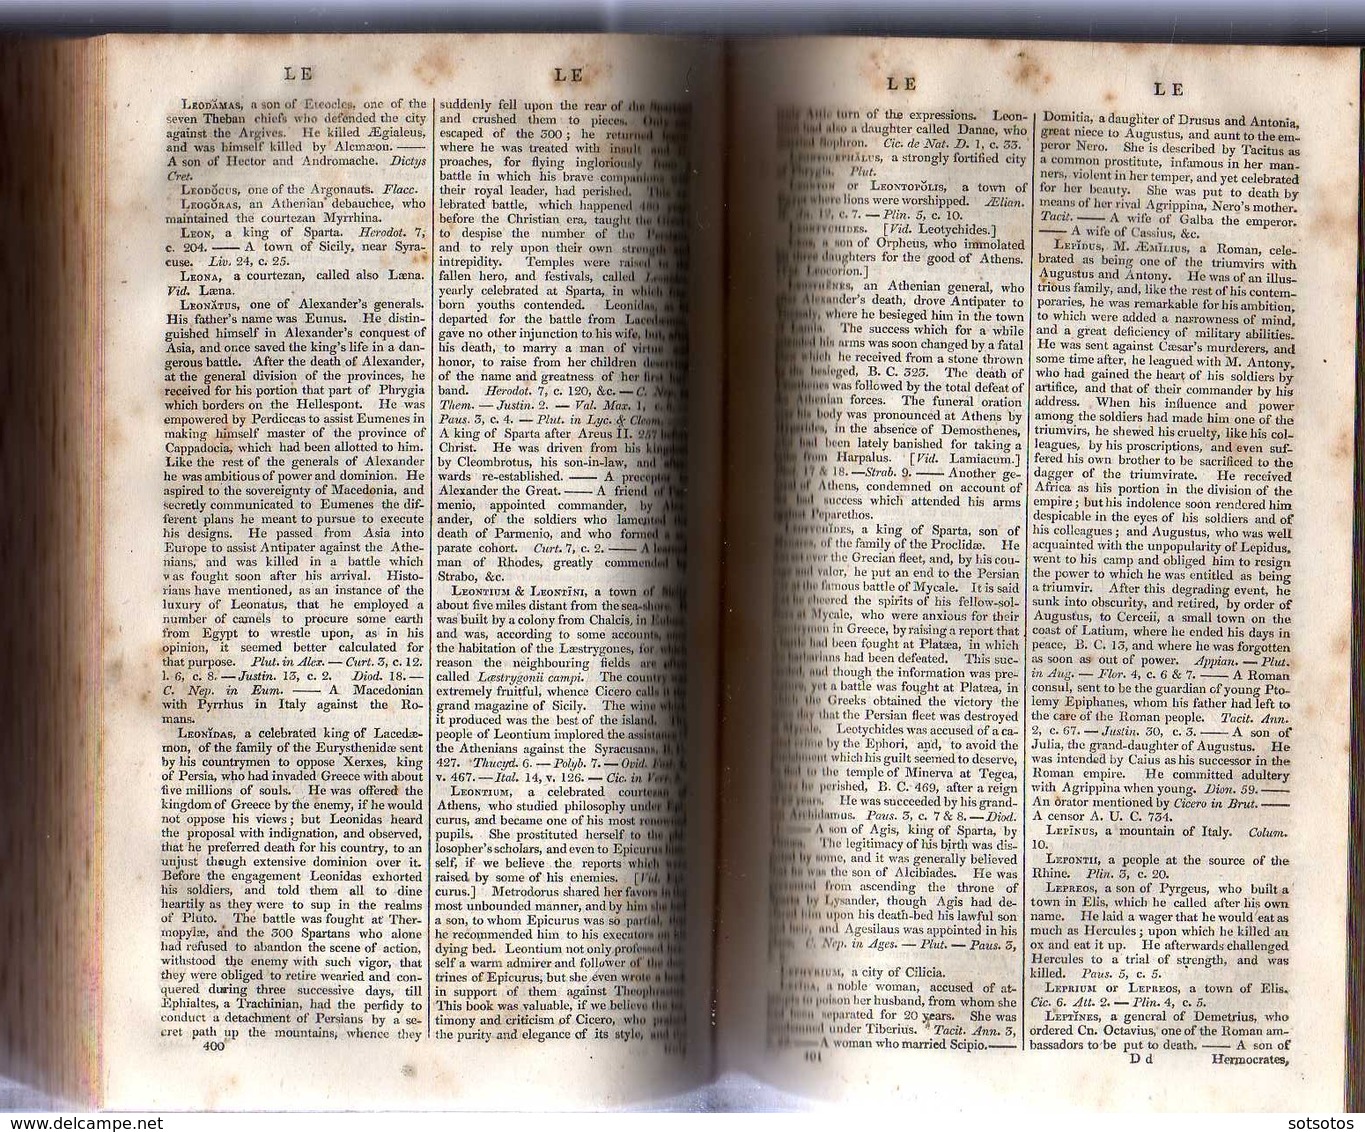 A CLASSICAL DICTIONARY, containing a copius account of all the PROPER NAMES mentioned in ANCIENT AUTHORS with the value